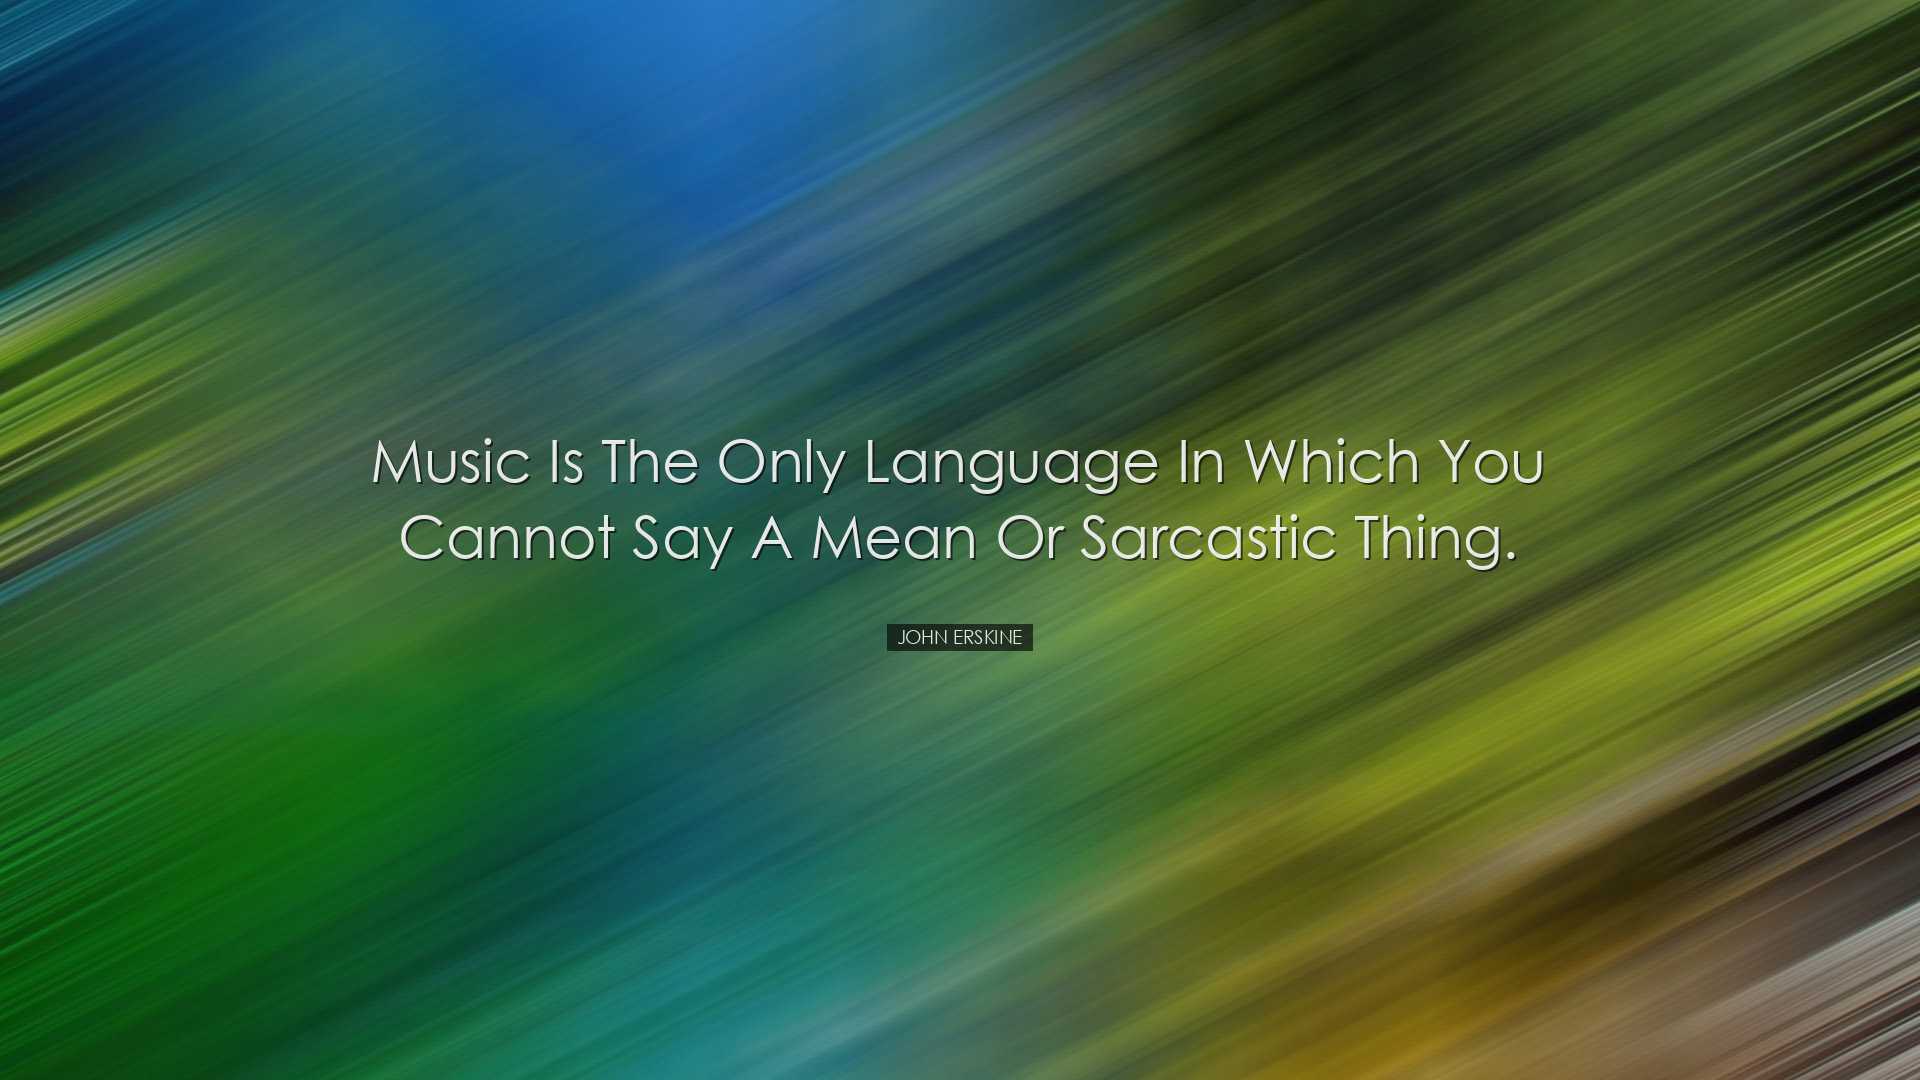 Music is the only language in which you cannot say a mean or sarca